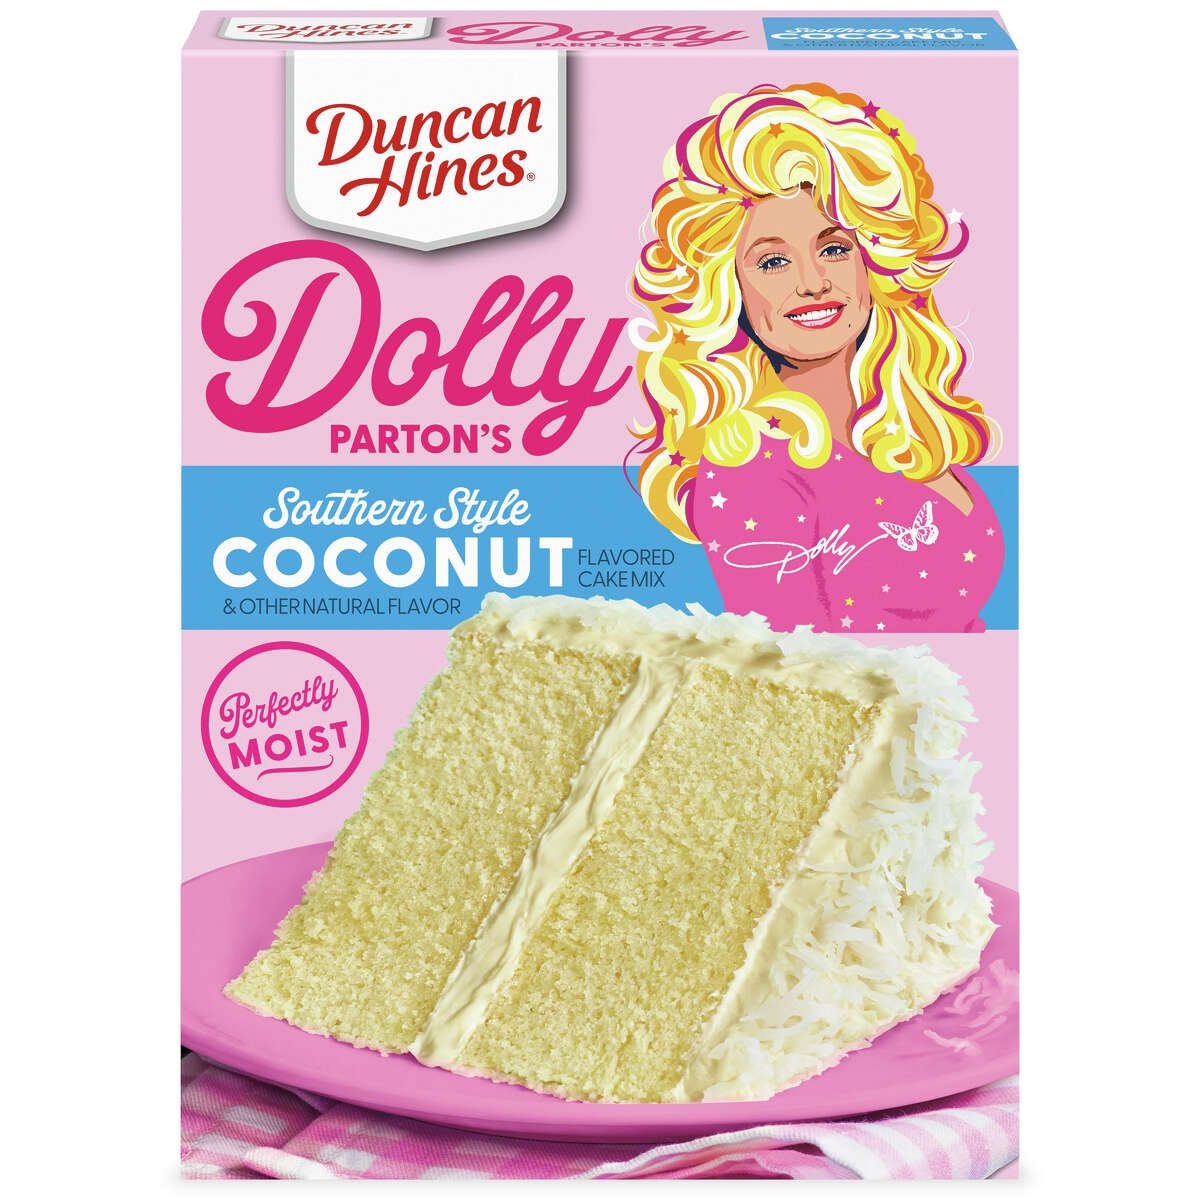 Duncan Hines Dolly Parton's Southern Style Coconut Flavored Cake Mix will be available online in the limited-edition Dolly Parton's Baking Collection starting Jan. 26, 2022, and in stores beginning in March.